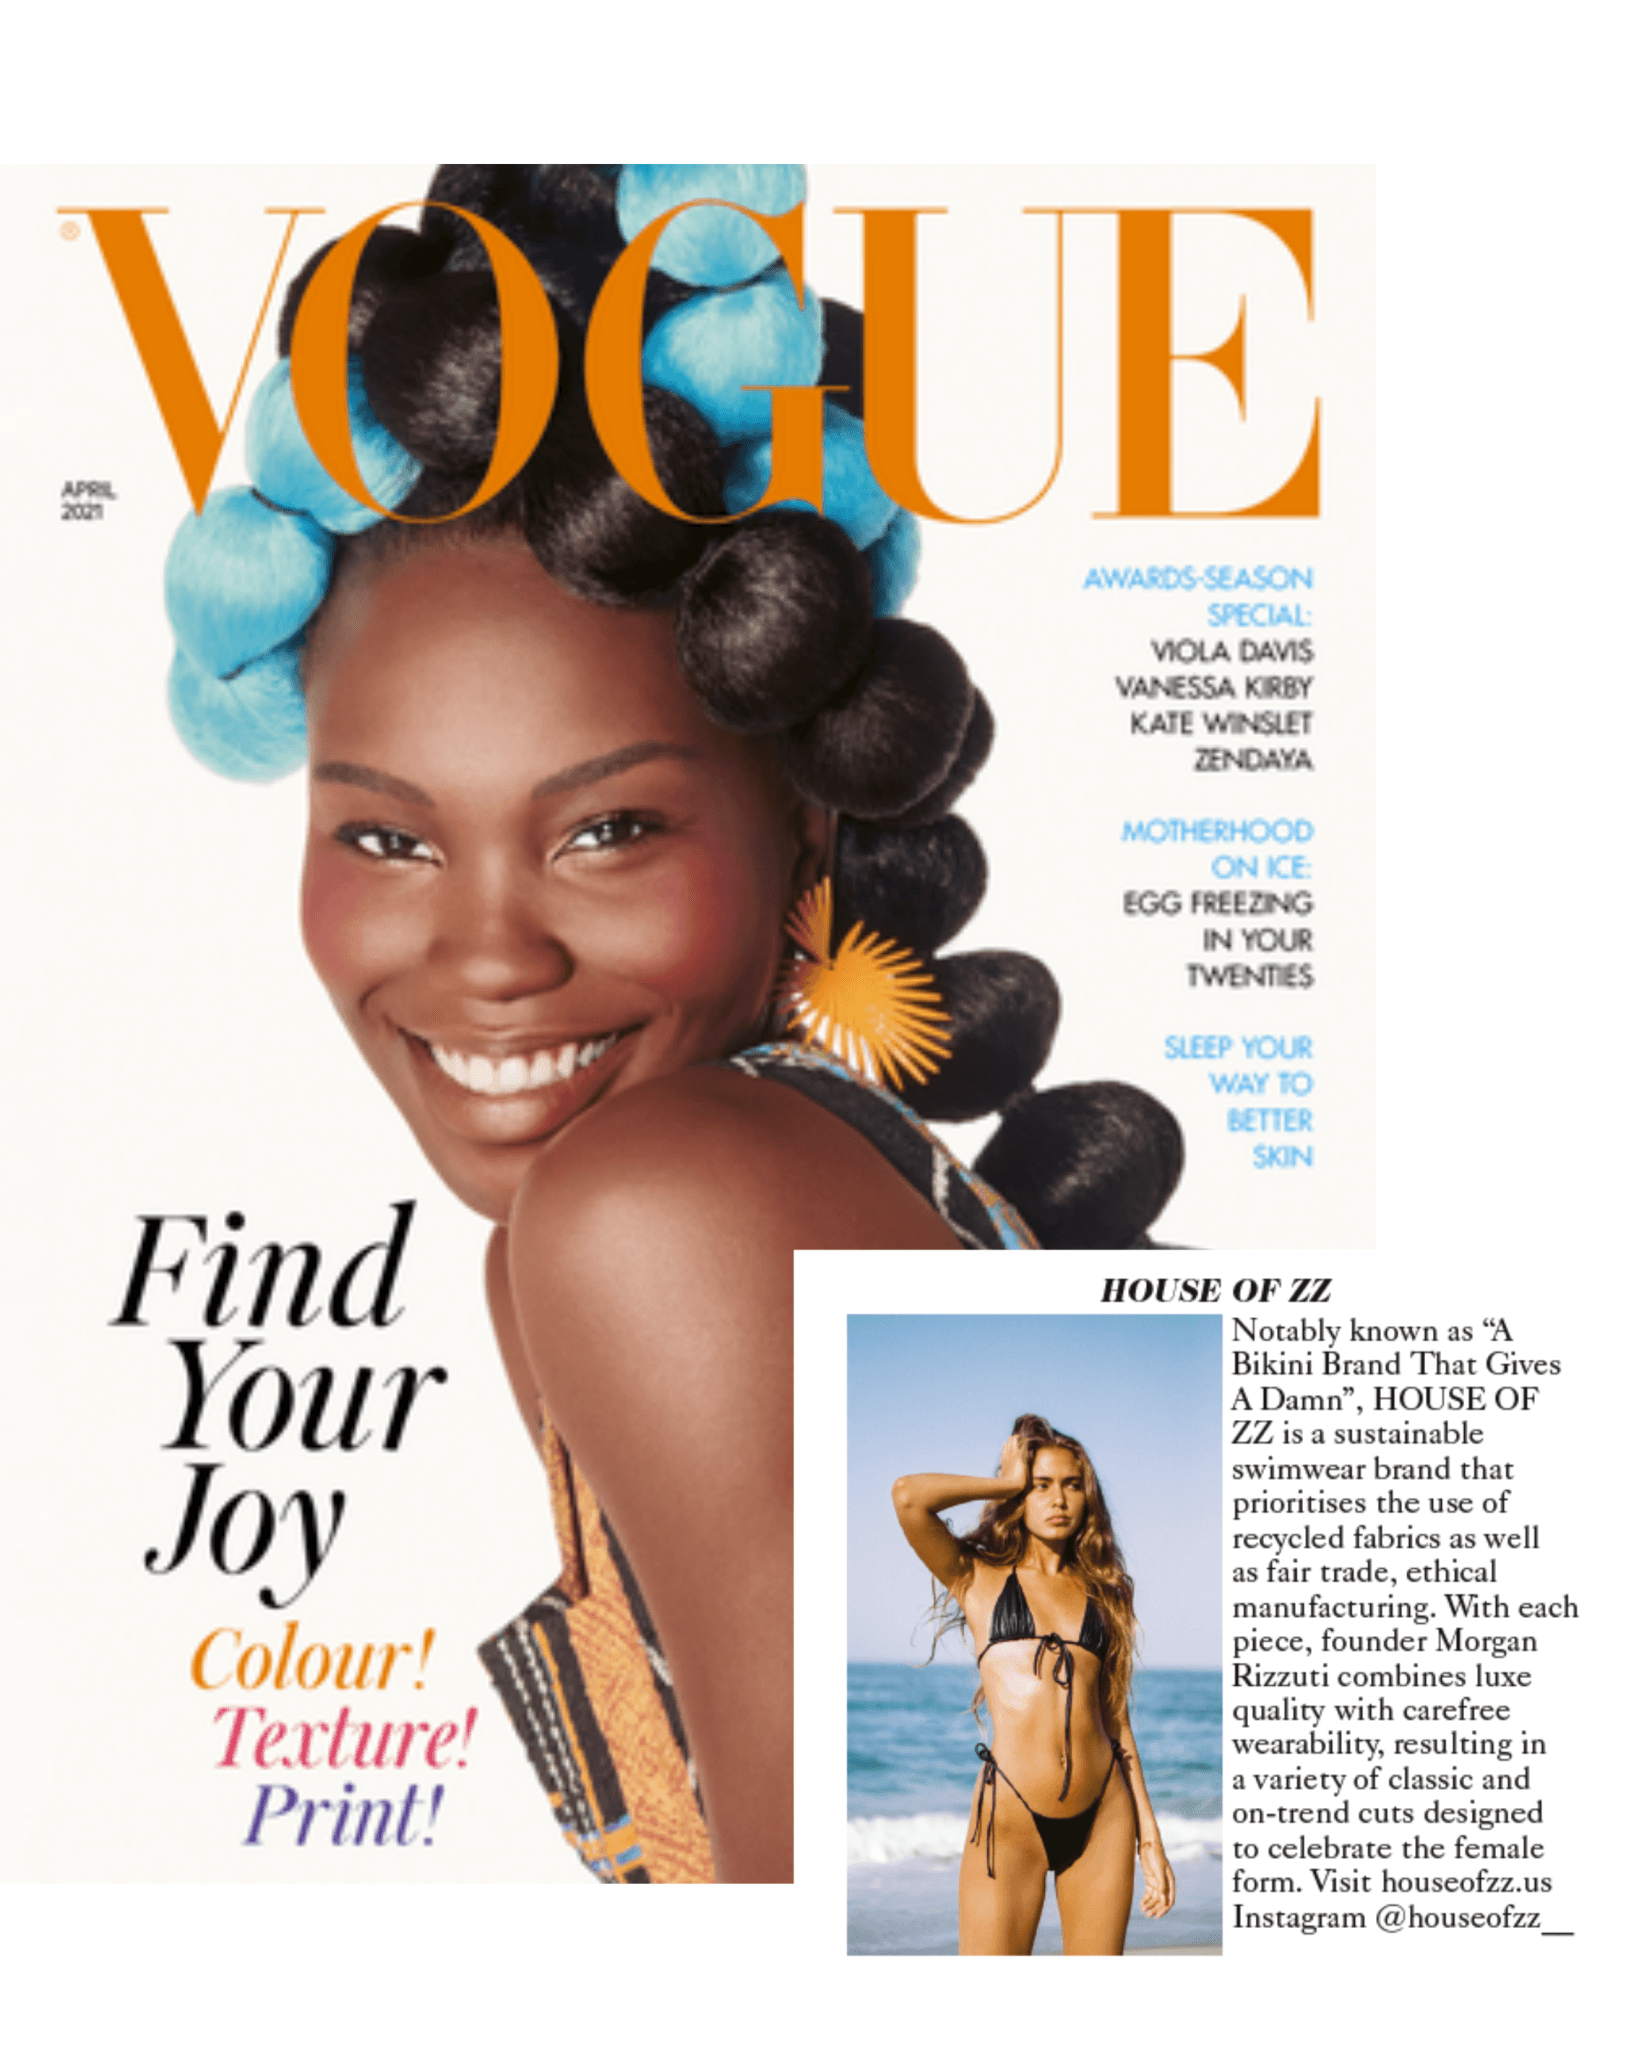 BRITISH VOGUE: April 2021 Print Issue - HOUSE OF ZZ